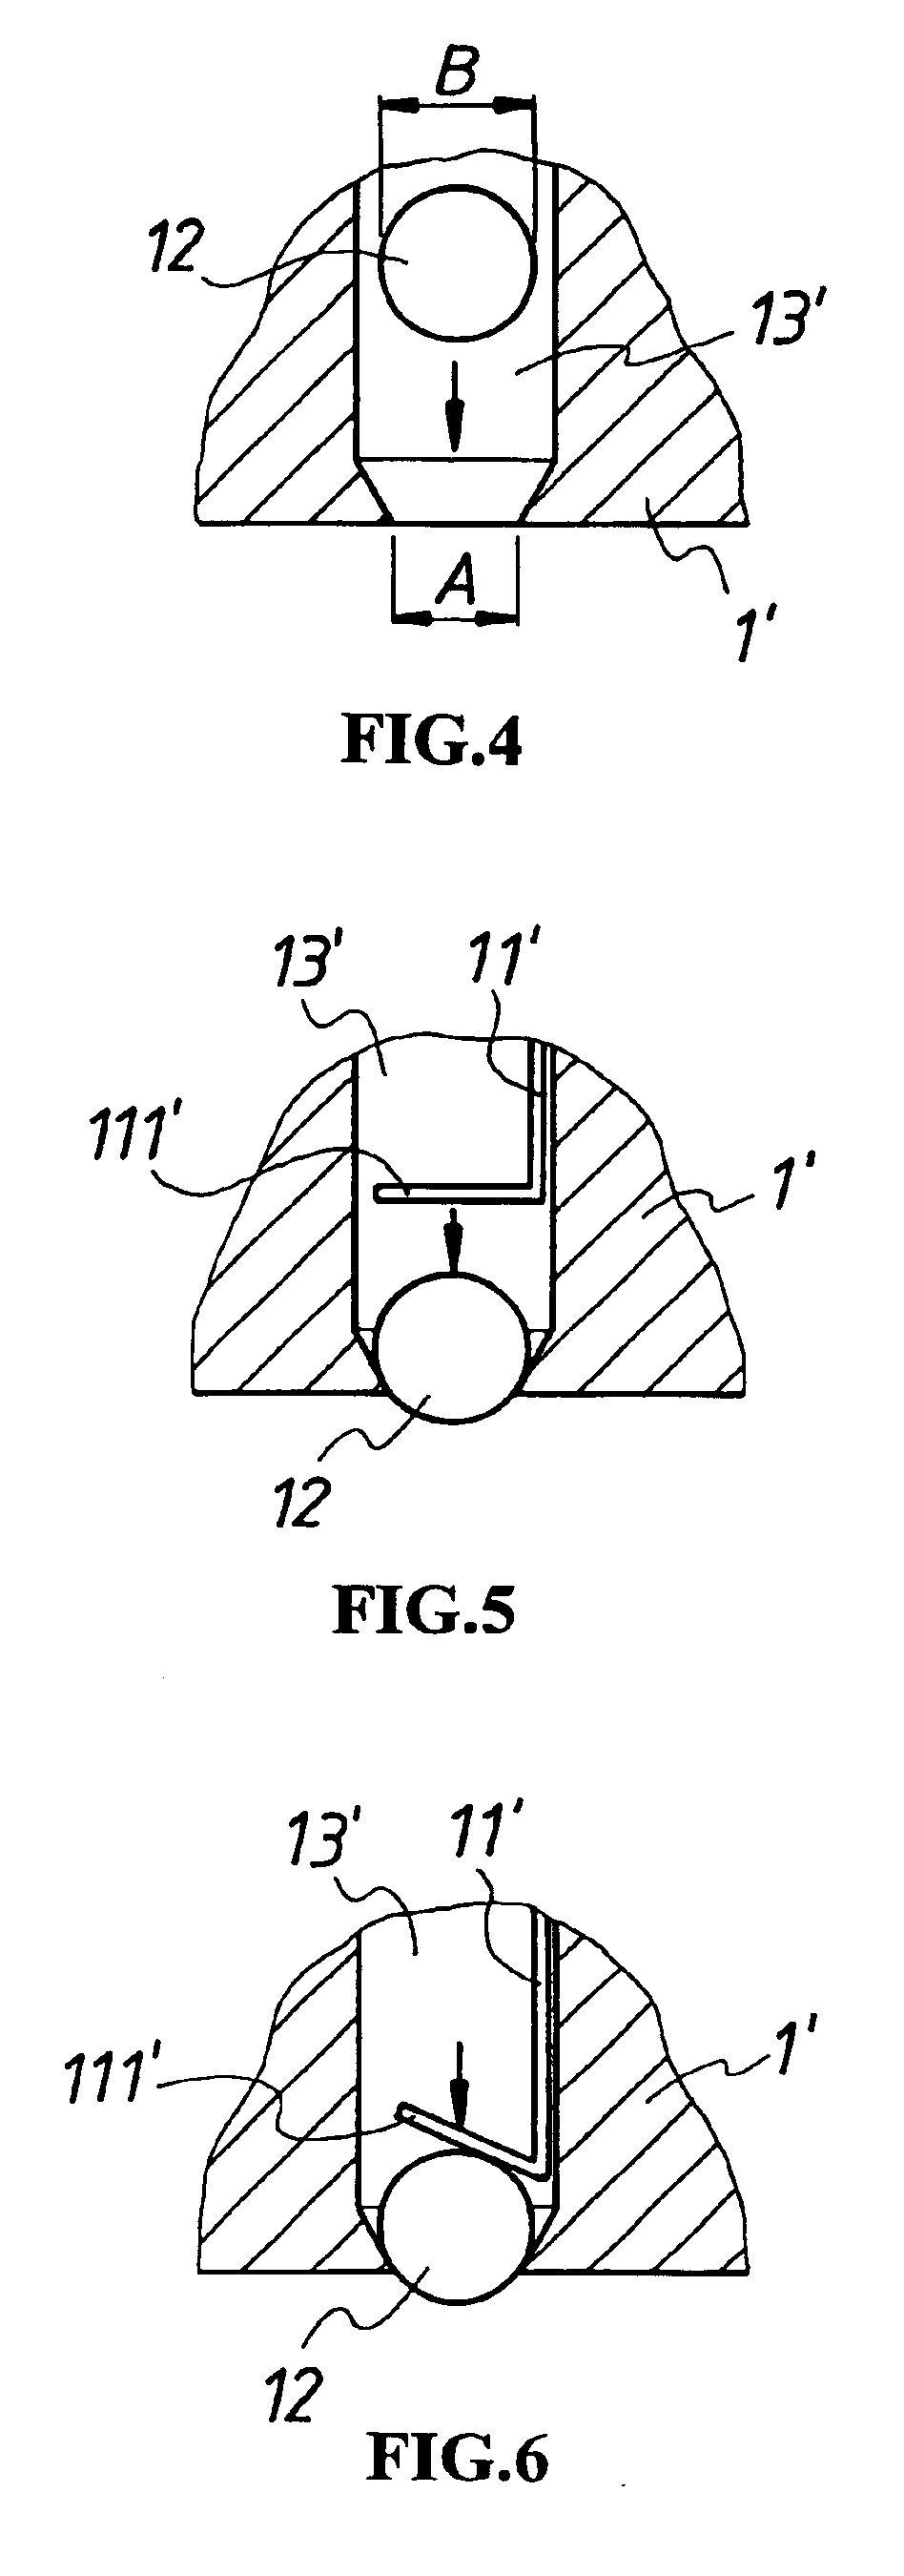 Connecting method of pins and tin balls of an electric connector